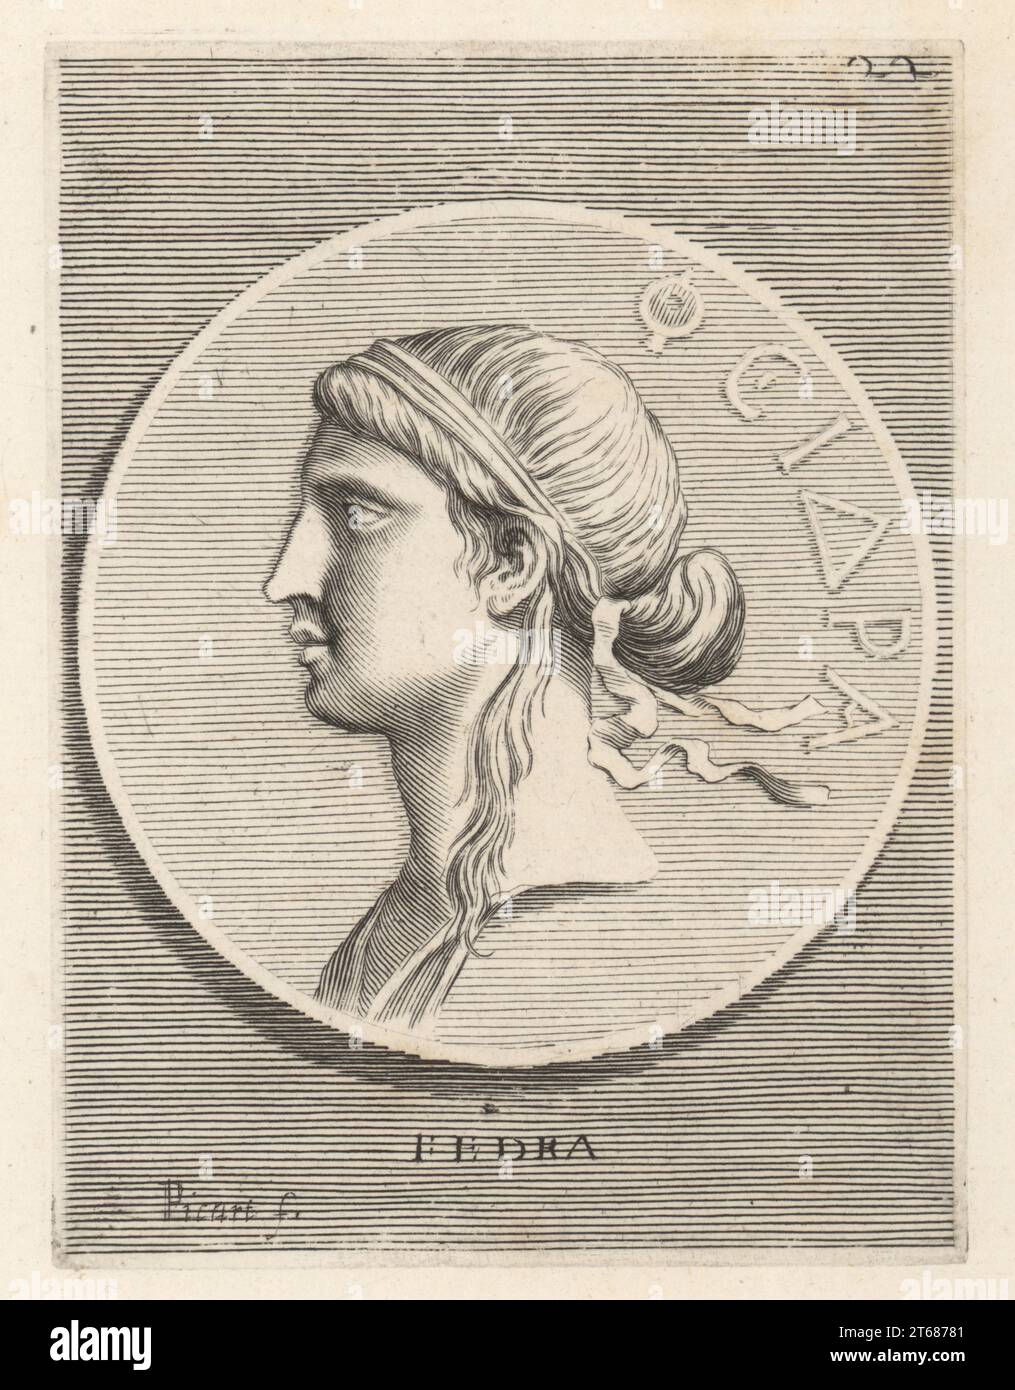 Phaedra, Cretan princess, daughter of Minos and Pasiphae, sister of Ariadne, and wife of Theseus, king of Athens. Head of a woman with her hair tied up in a simple band from a bronze medal. Fedra. Copperplate engraving by Etienne Picart after Giovanni Angelo Canini from Iconografia, cioe disegni d'imagini de famosissimi monarchi, regi, filososi, poeti ed oratori dell' Antichita, Drawings of images of famous monarchs, kings, philosophers, poets and orators of Antiquity, Ignatio deLazari, Rome, 1699. Stock Photo